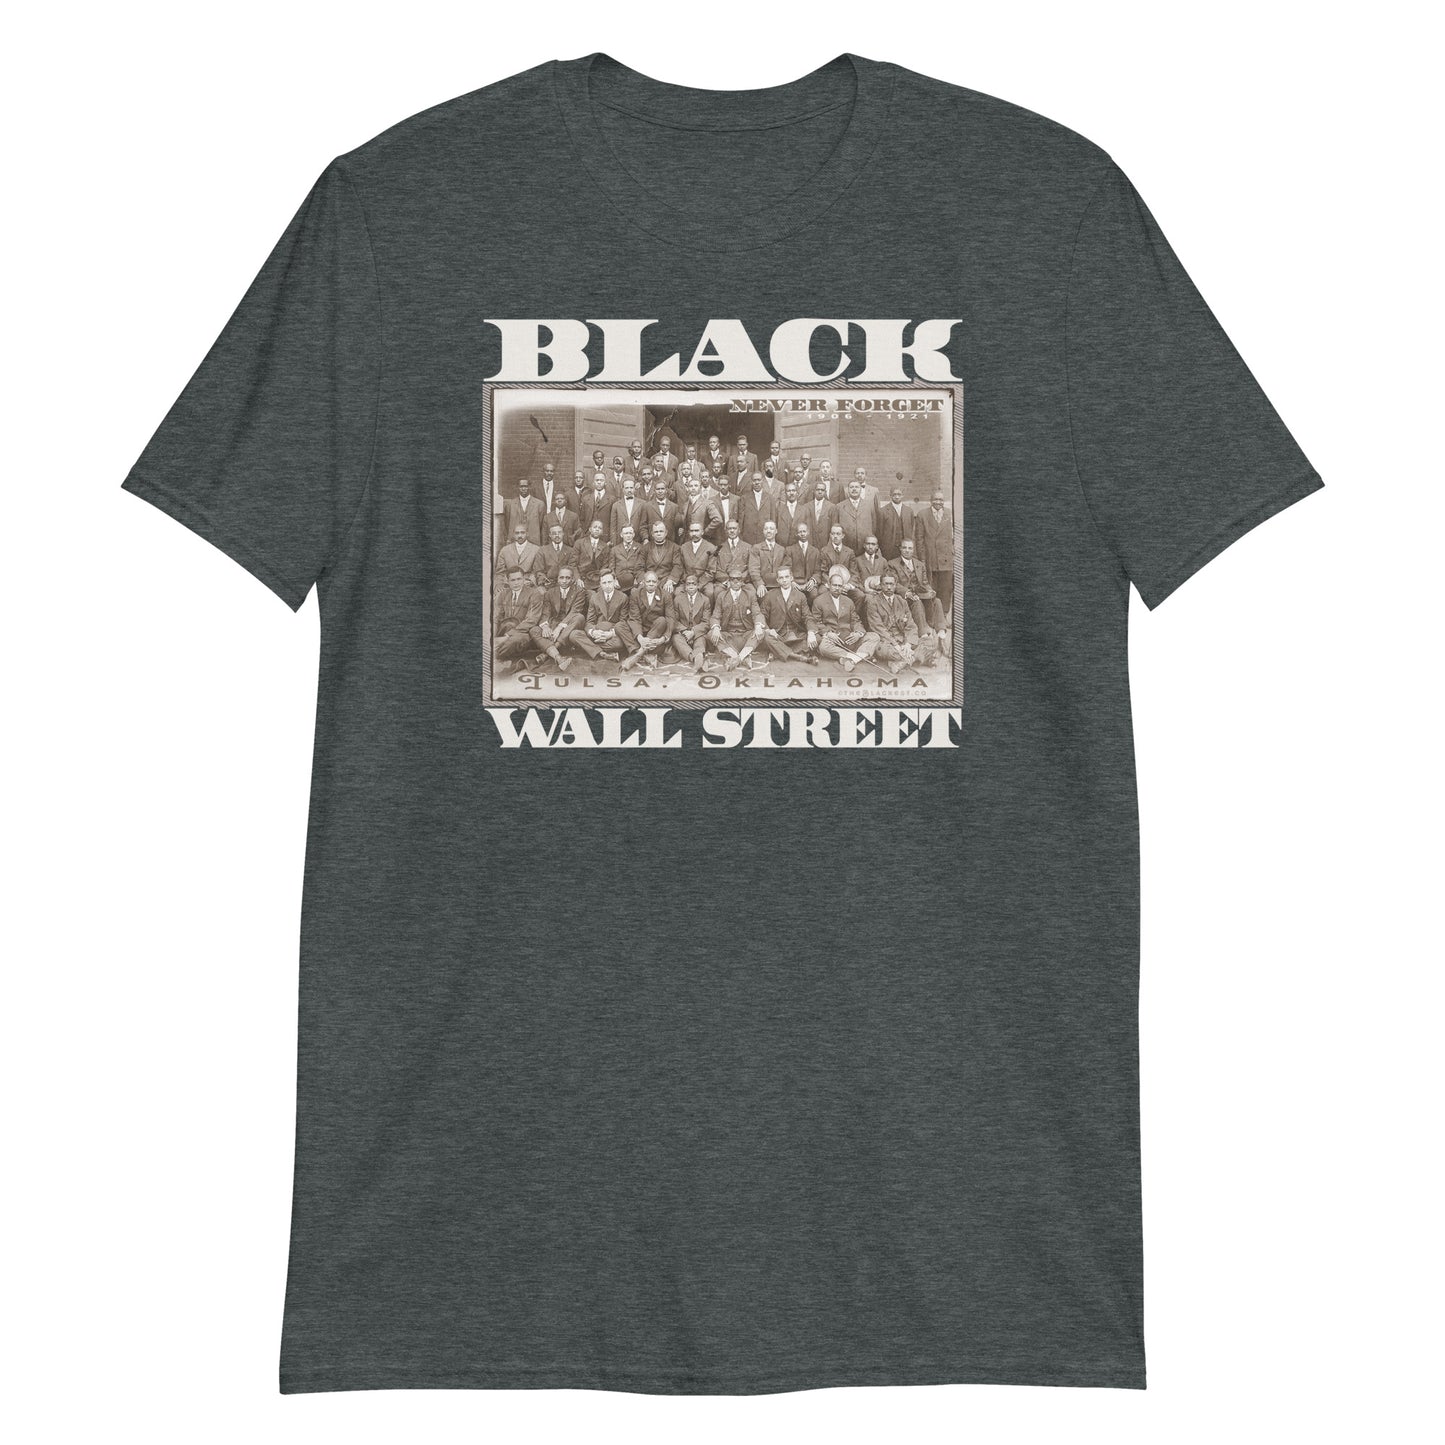 grey t shirt with a black and white photo of black wall street